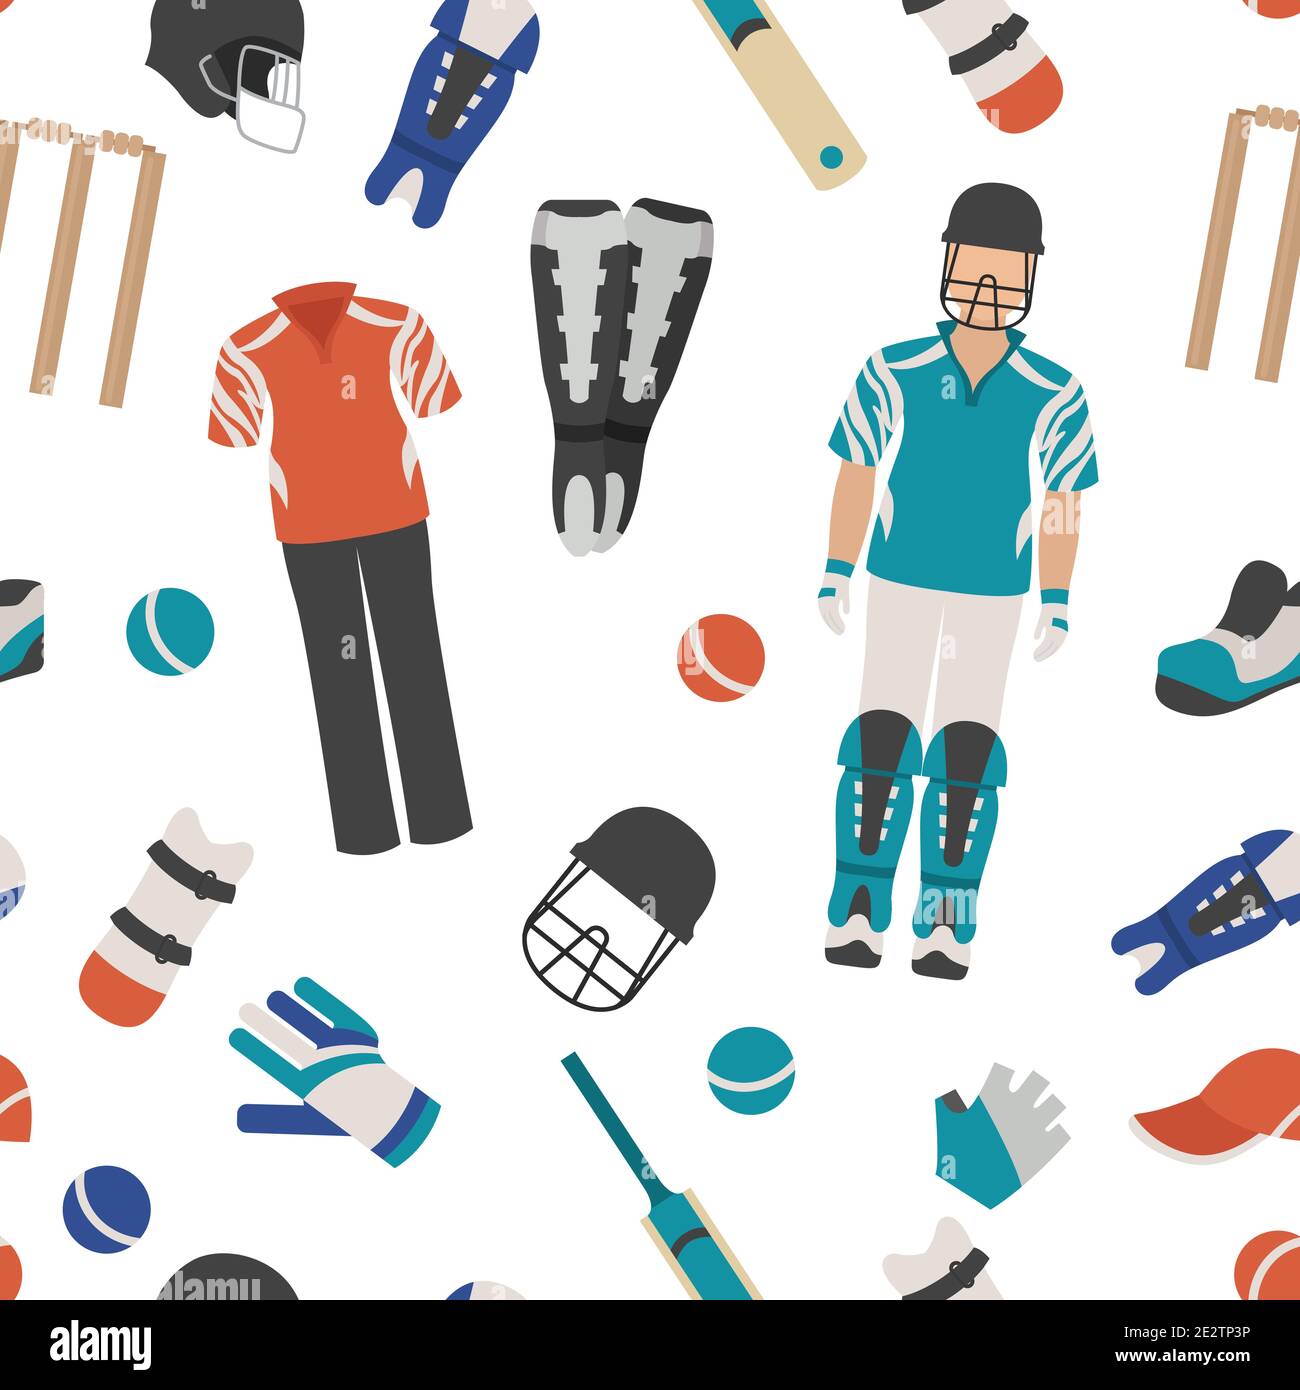 Sporting gear set. Cricketer equipment and accessories flat design icon.Vector illustration Stock Vector